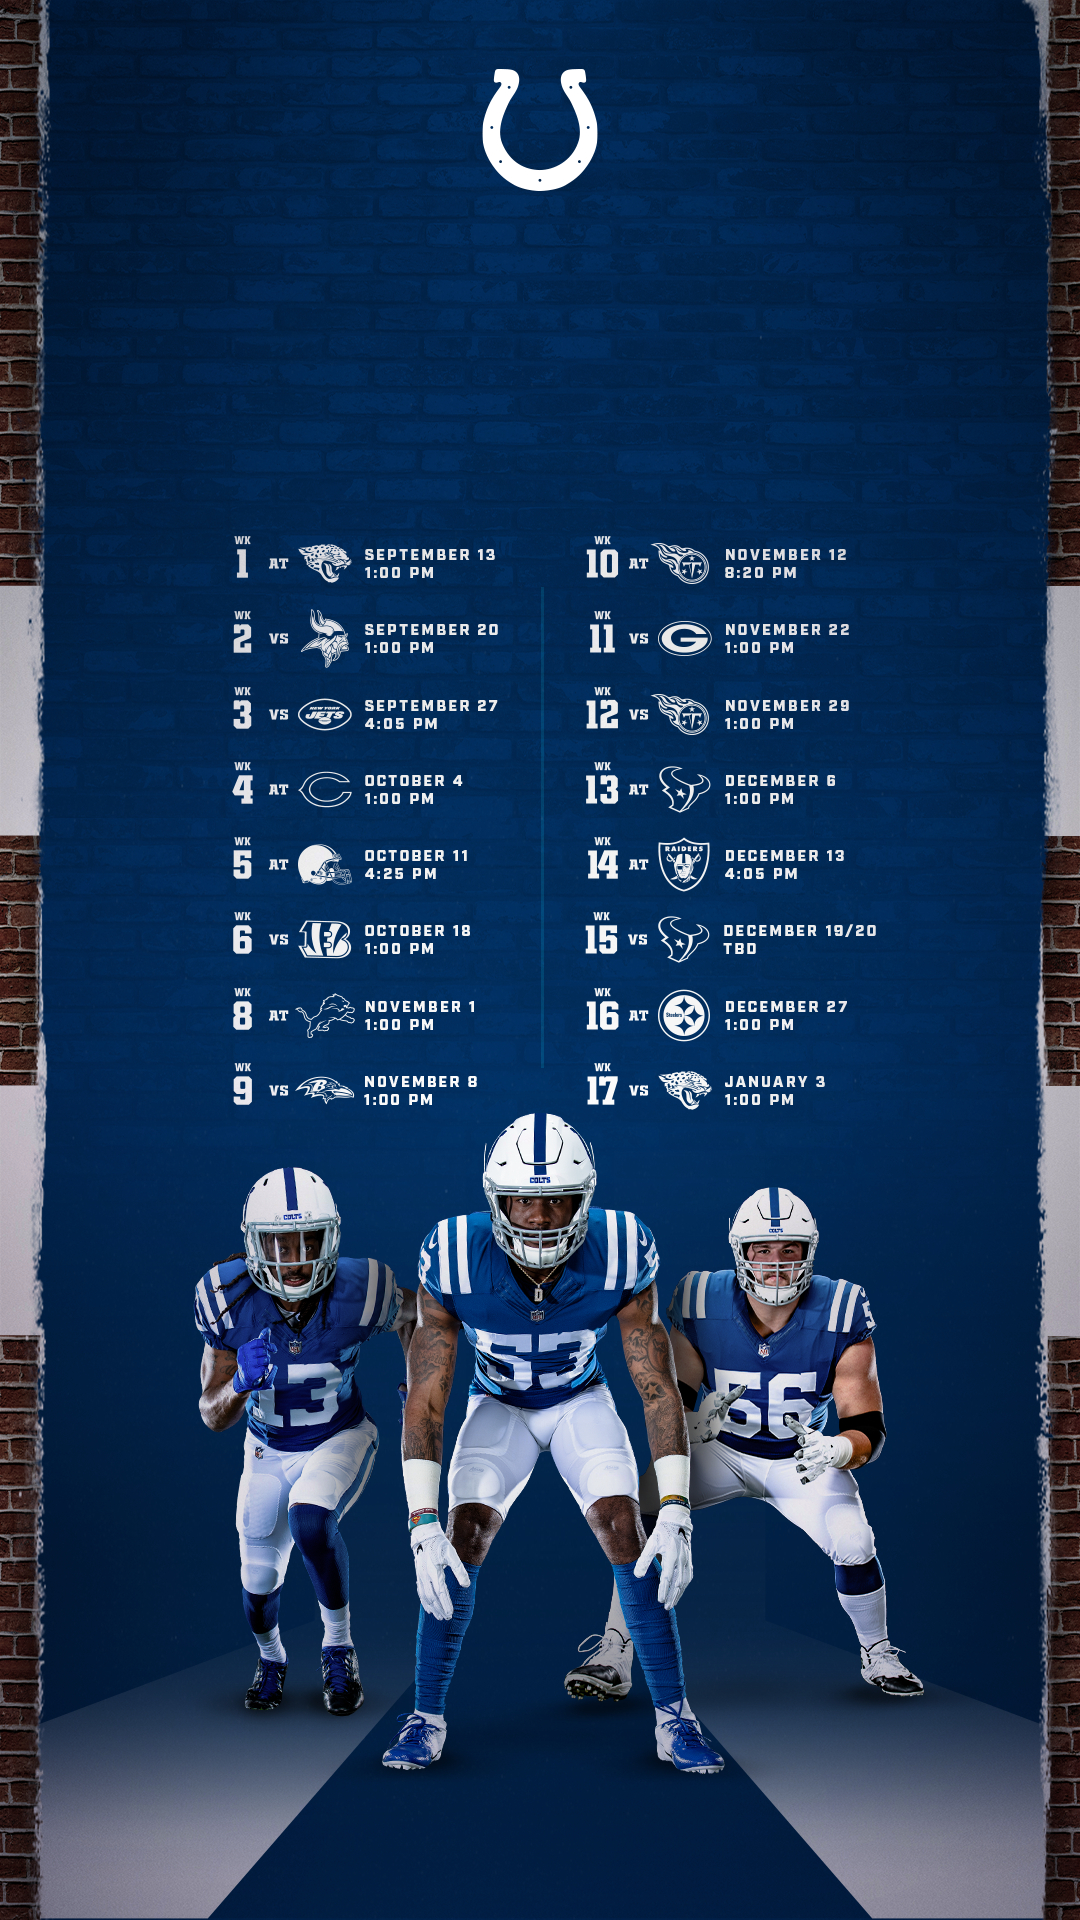 Colts Schedule | Indianapolis Colts - Colts